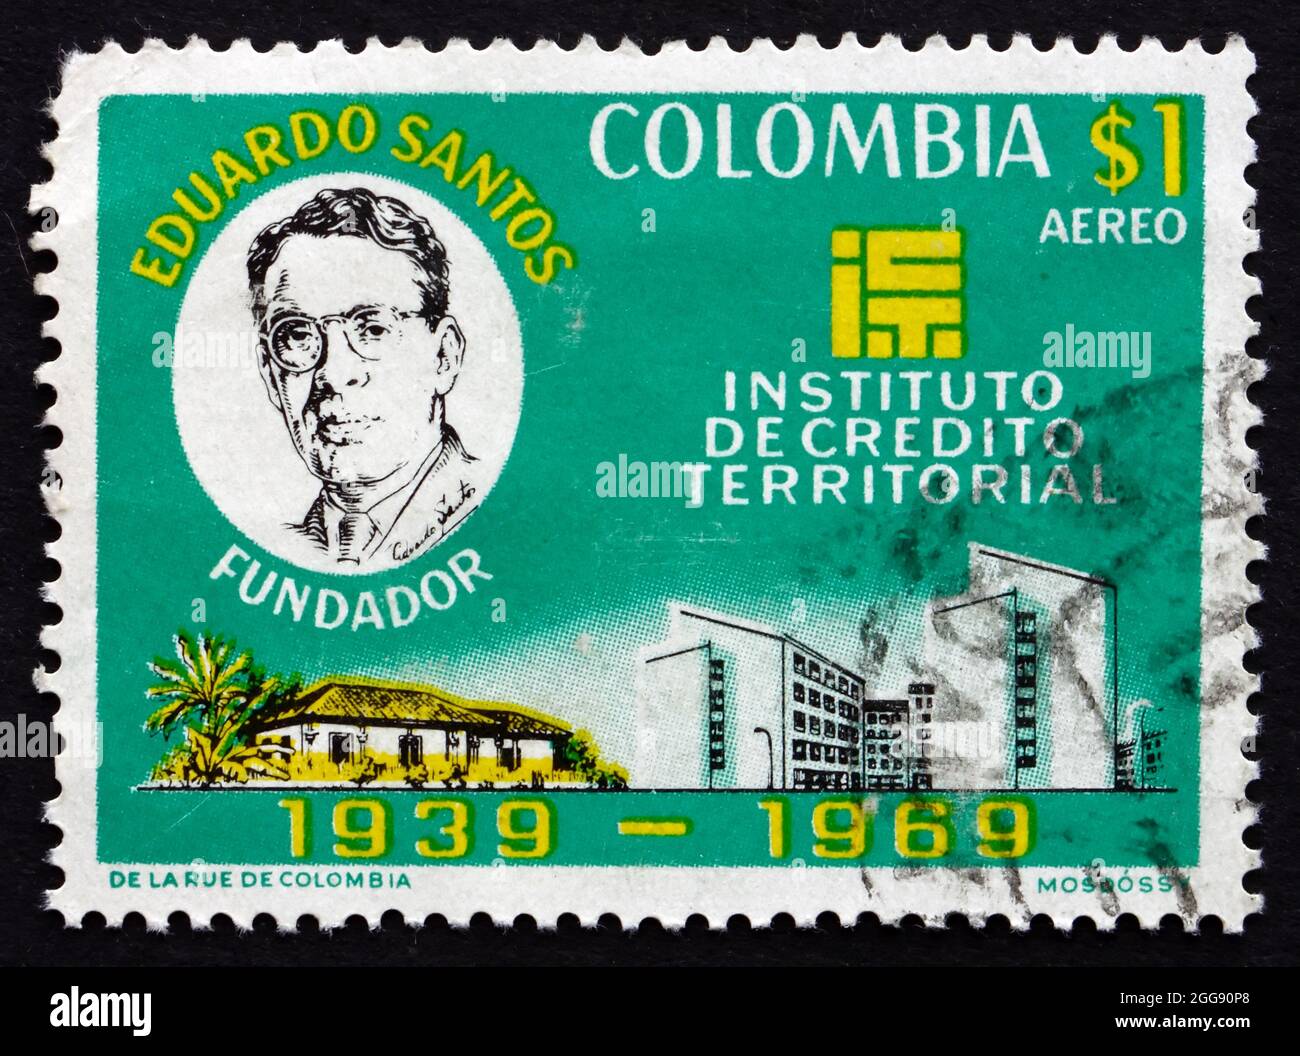 COLOMBIA - CIRCA 1970: a stamp printed in the Colombia shows Eduardo Santos, Rural and Urban Buildings, Founding of the Territorial Credit Institute, Stock Photo